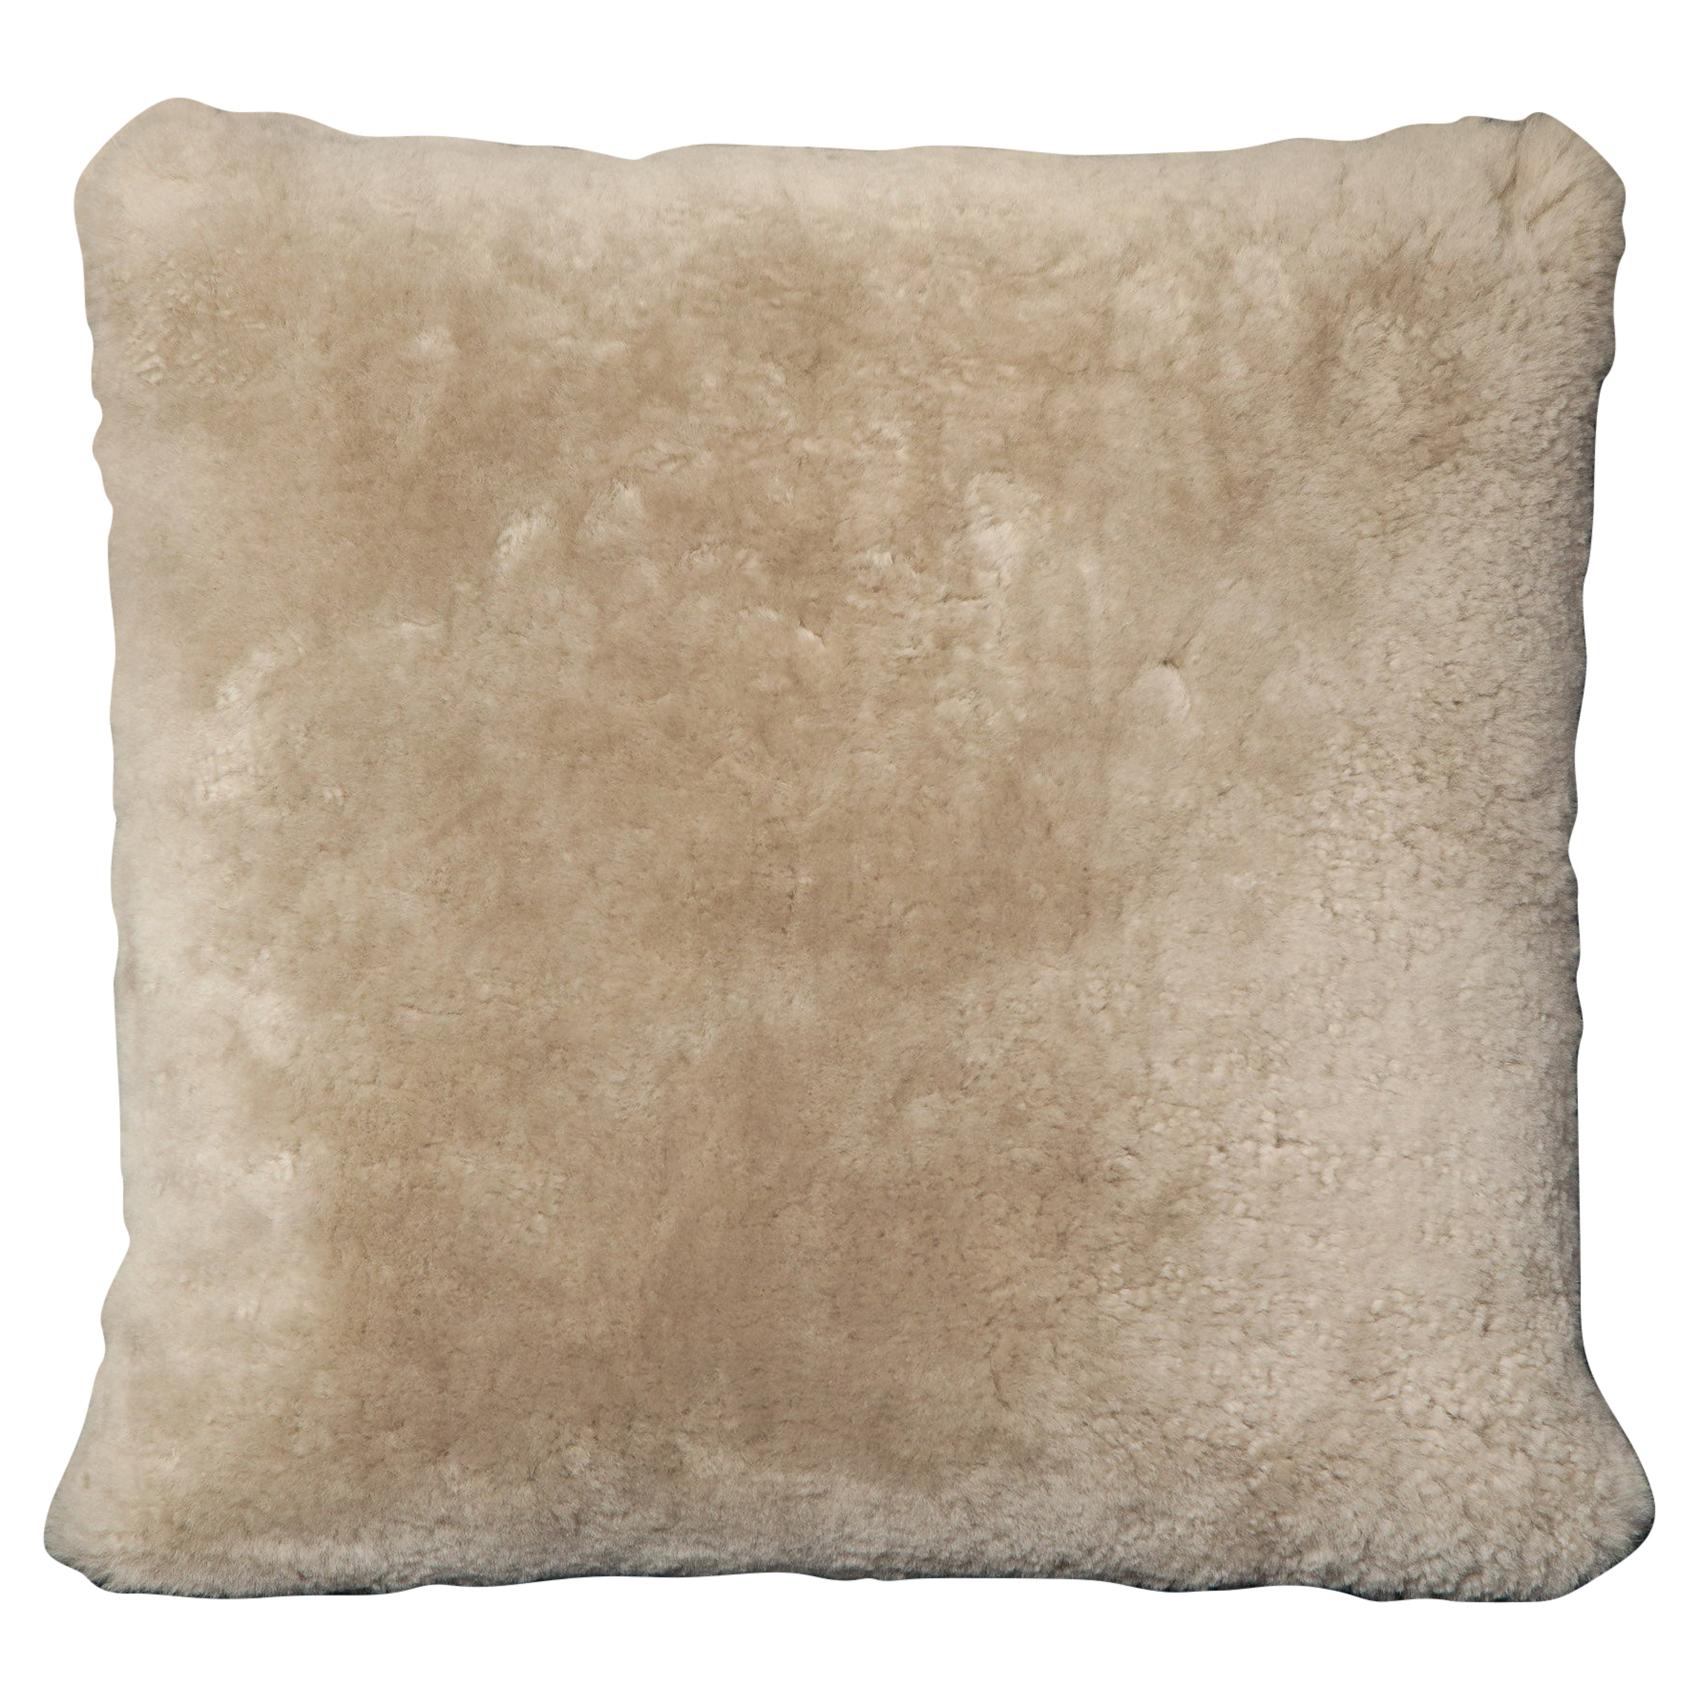 Genuine Shearling Pillow in Taupe Color